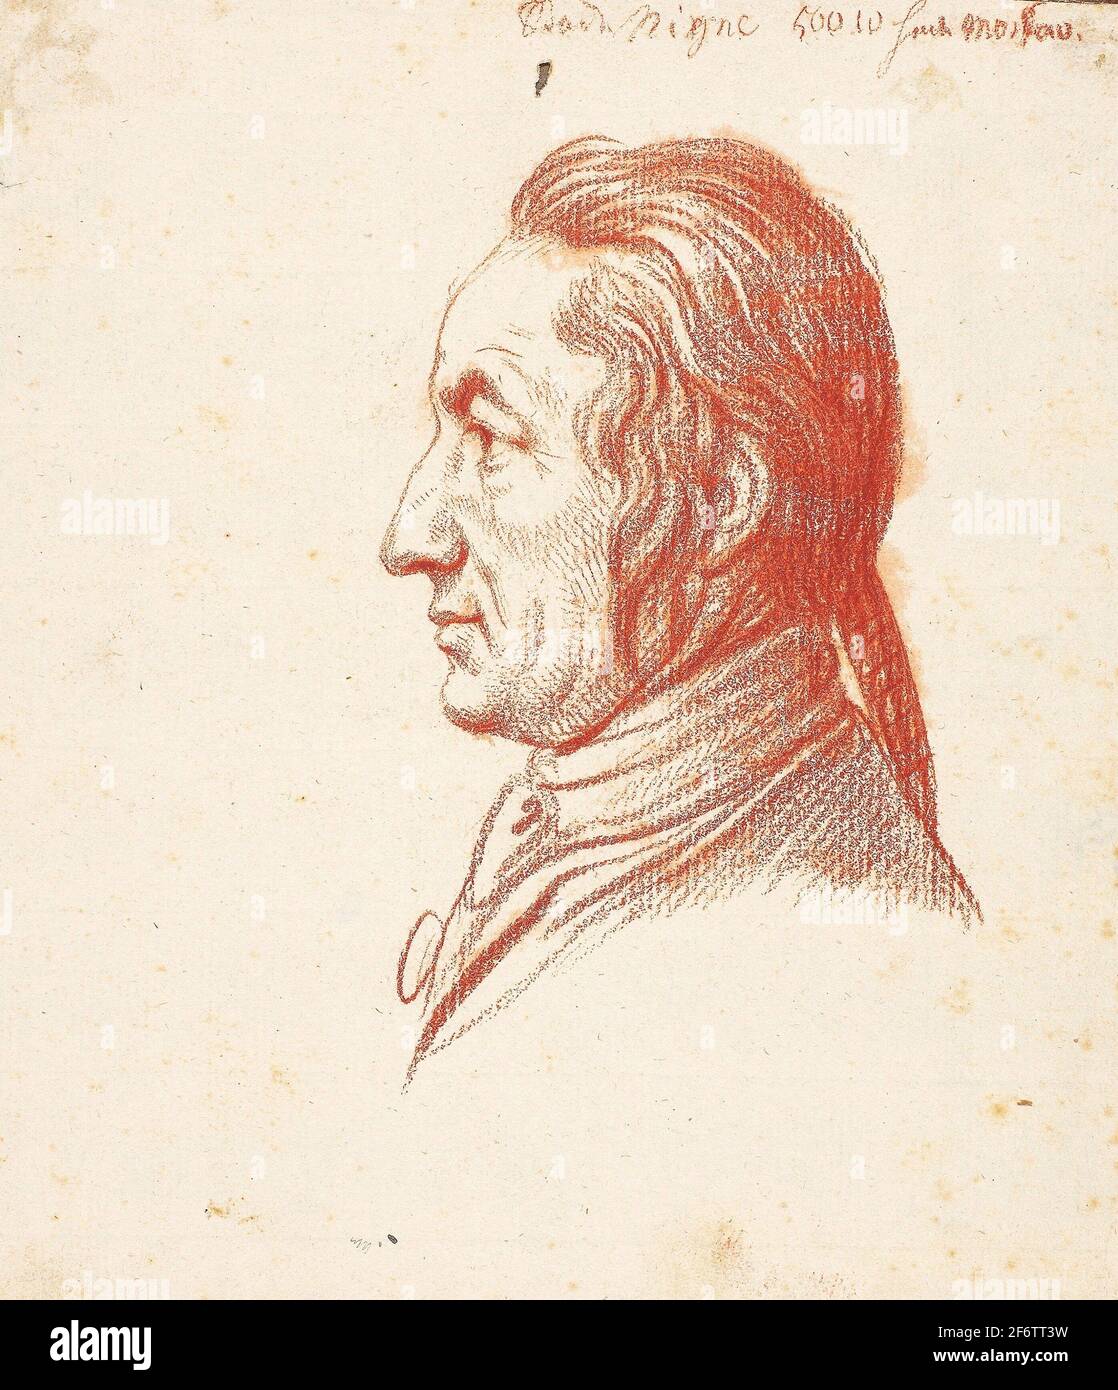 Daniel Nikolaus Chodowiecki. Portrait Head of a Man in Profile-Daniel Nikolaus Chodowiecki German, 1726-1801. Red chalk on ivory laid paper, tipped Stock Photo